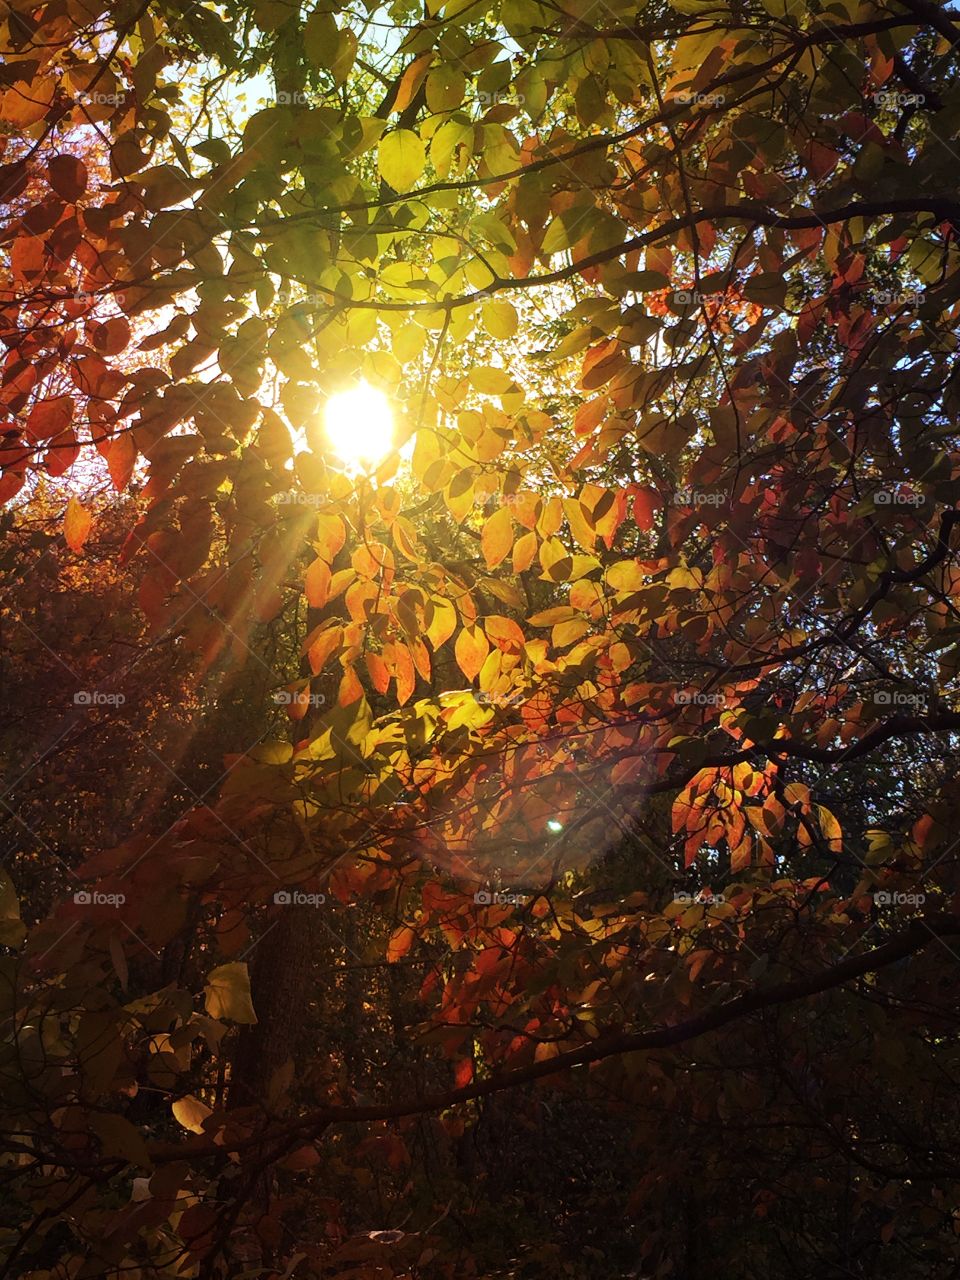 Mother Nature's Curtains. Mother Nature's curtains...fall foliage in full color, backlit by sunlight